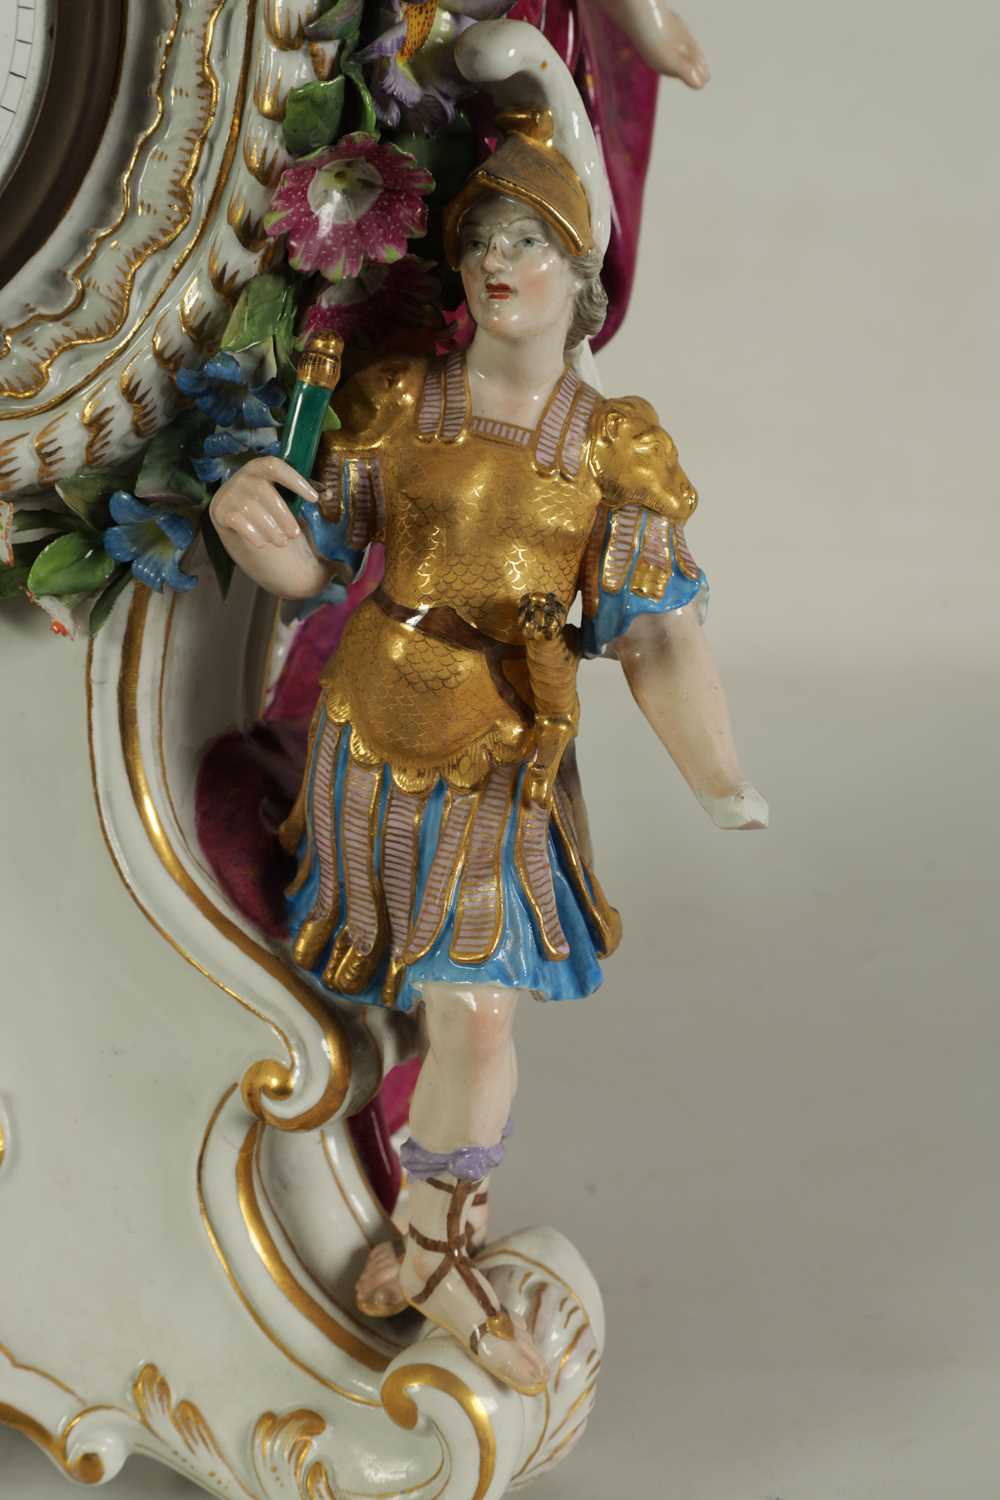 AN IMPRESSIVE MID/LATE 19TH CENTURY MEISSEN MANTEL CLOCK OF LARGE SIZE - Image 5 of 22